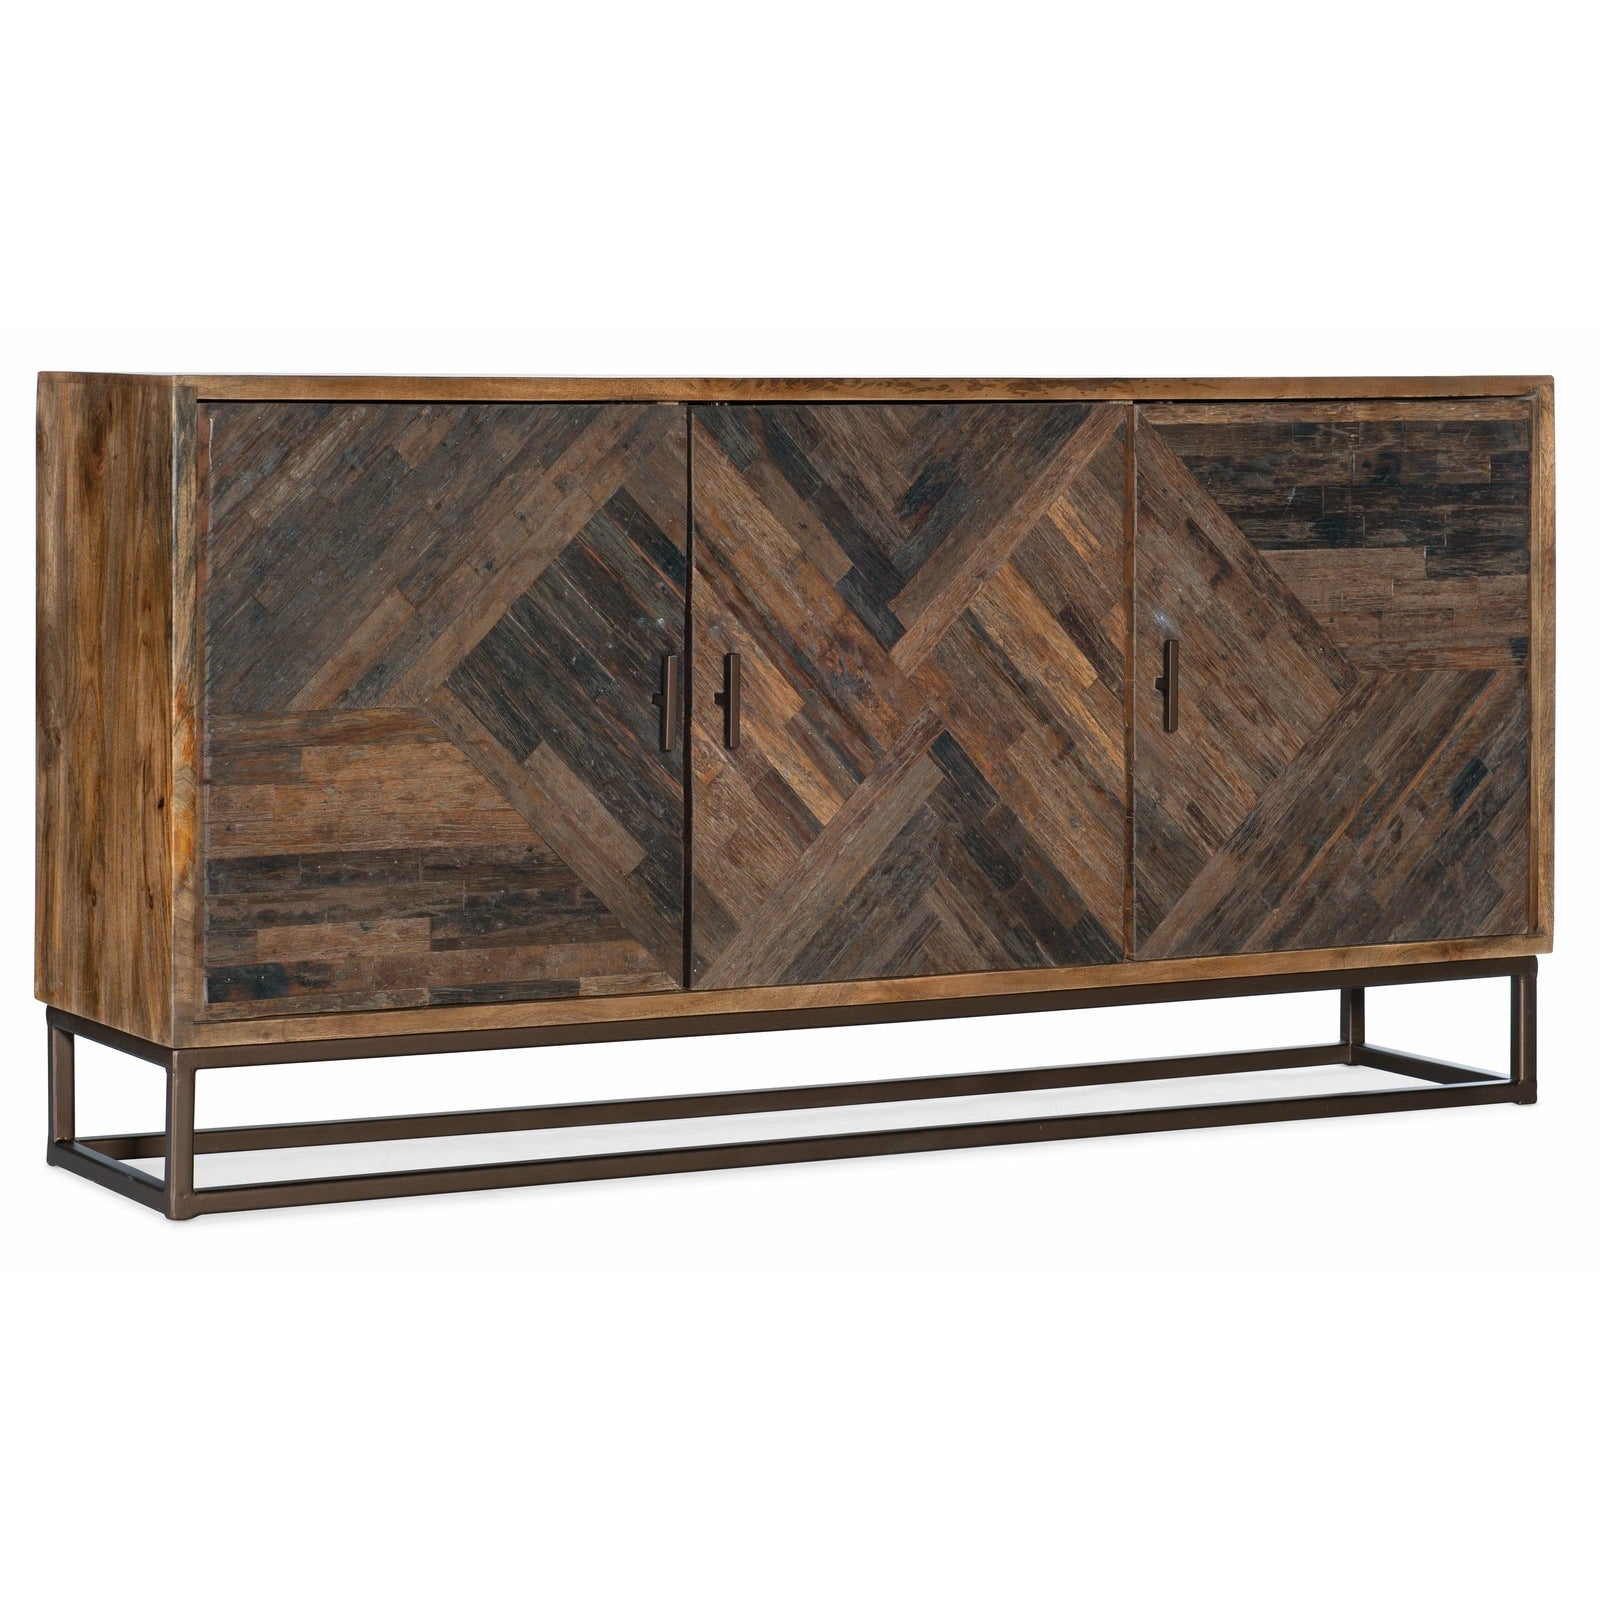 Timbers Entertainment Console